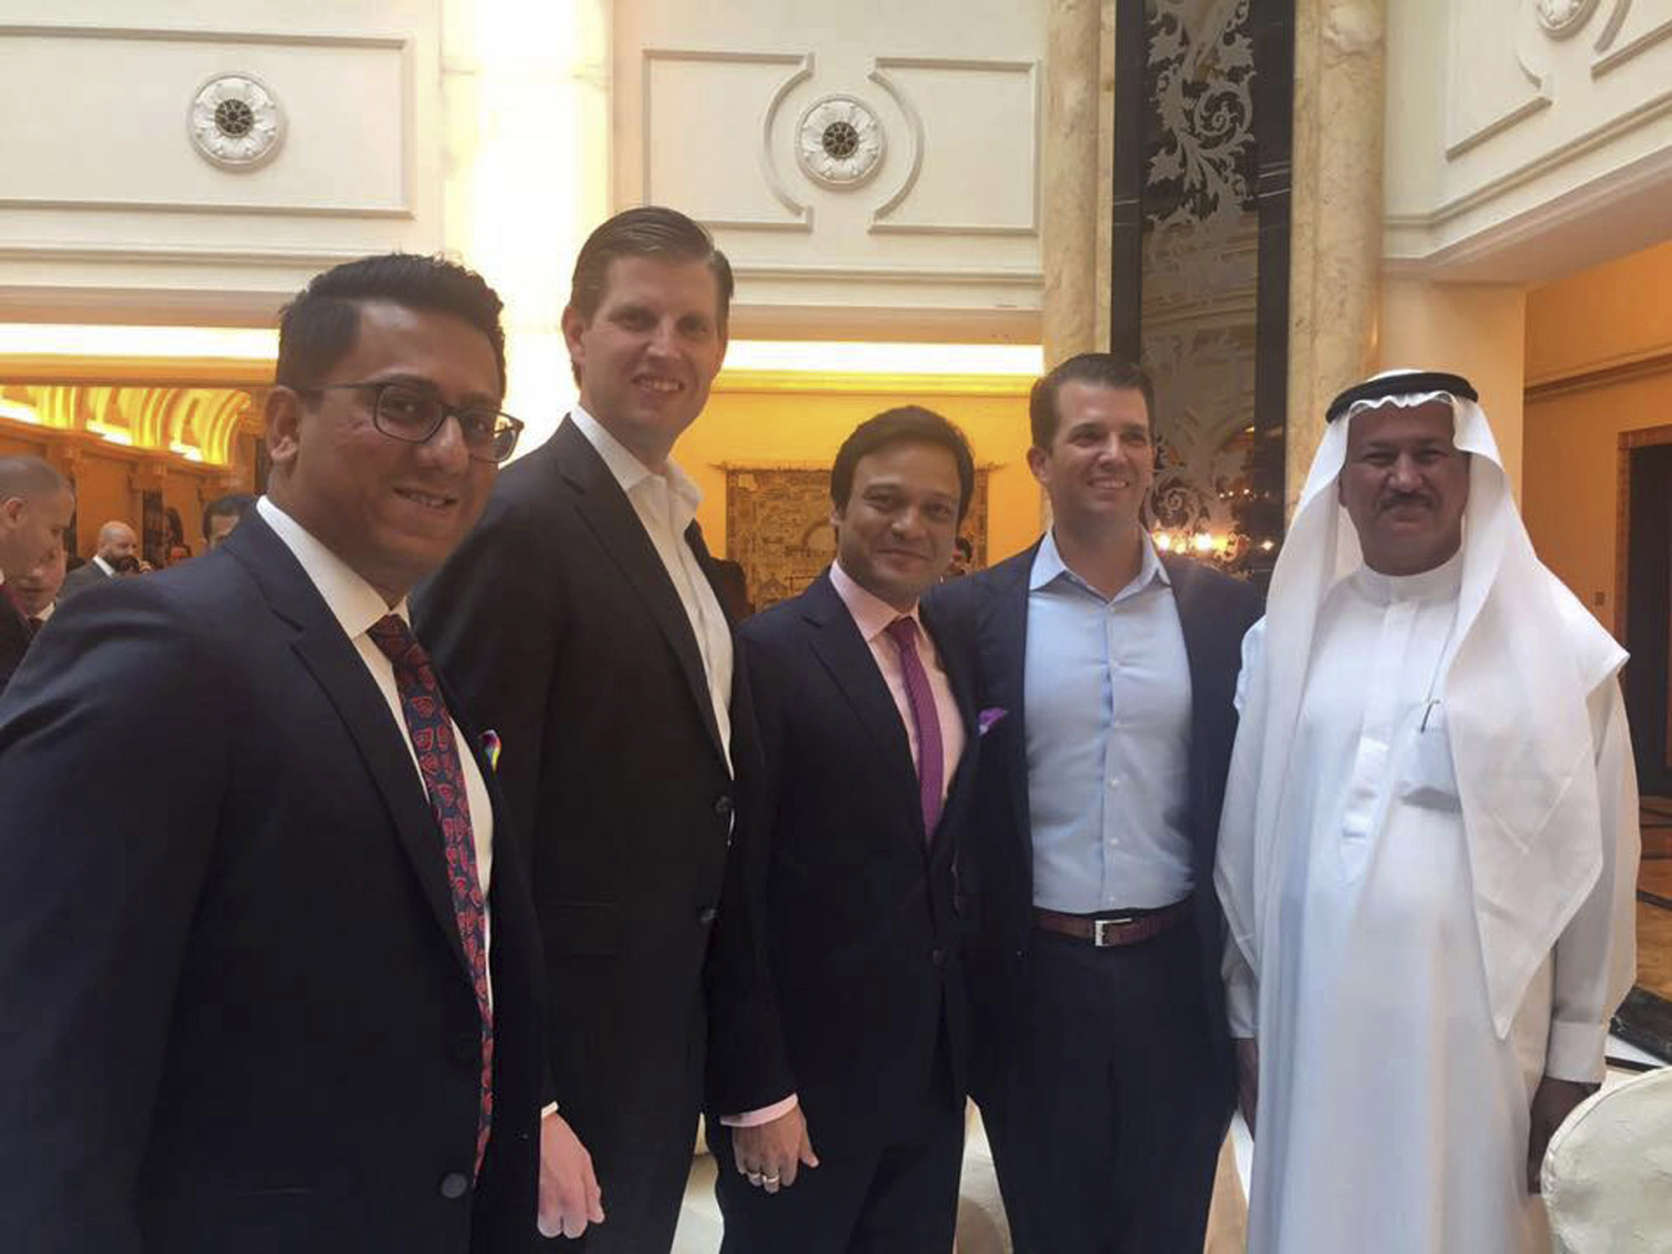 Banke International director Niraj Masand, far left, poses for a photo with Eric Trump, second left, Banke International director Porush Jhunjhunwala, center, Donald Trump Jr., second right, and DAMAC Properties chairman Hussain Sajwani, during festivities marking the formal opening of the Trump International Golf Club, in Dubai, United Arab Emirates, Saturday Feb. 18, 2017. 

Two of U.S. President Donald Trump's sons arrived in the UAE for an invitation-only ceremony Saturday to formally open the club. (AP Photo)